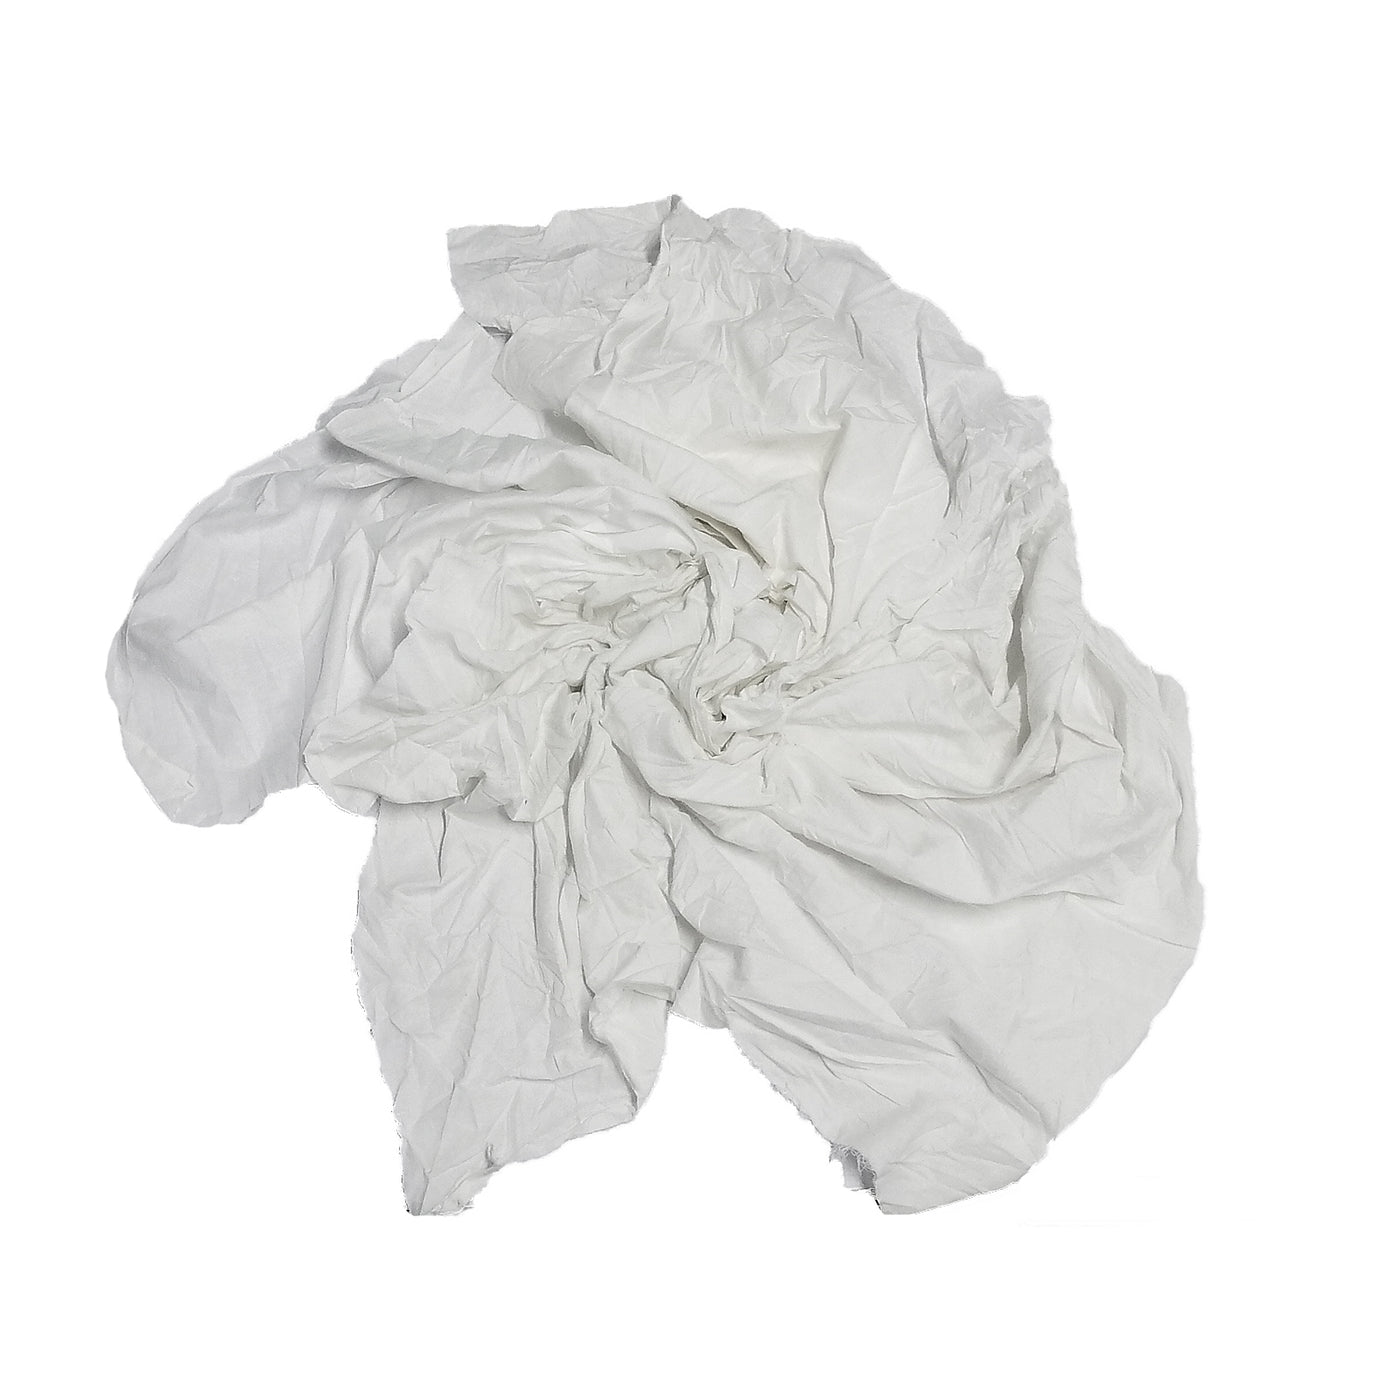 APPROVED VENDOR Cloth Rag: Terry Cloth, New, White, Varies, 25 lb Wt